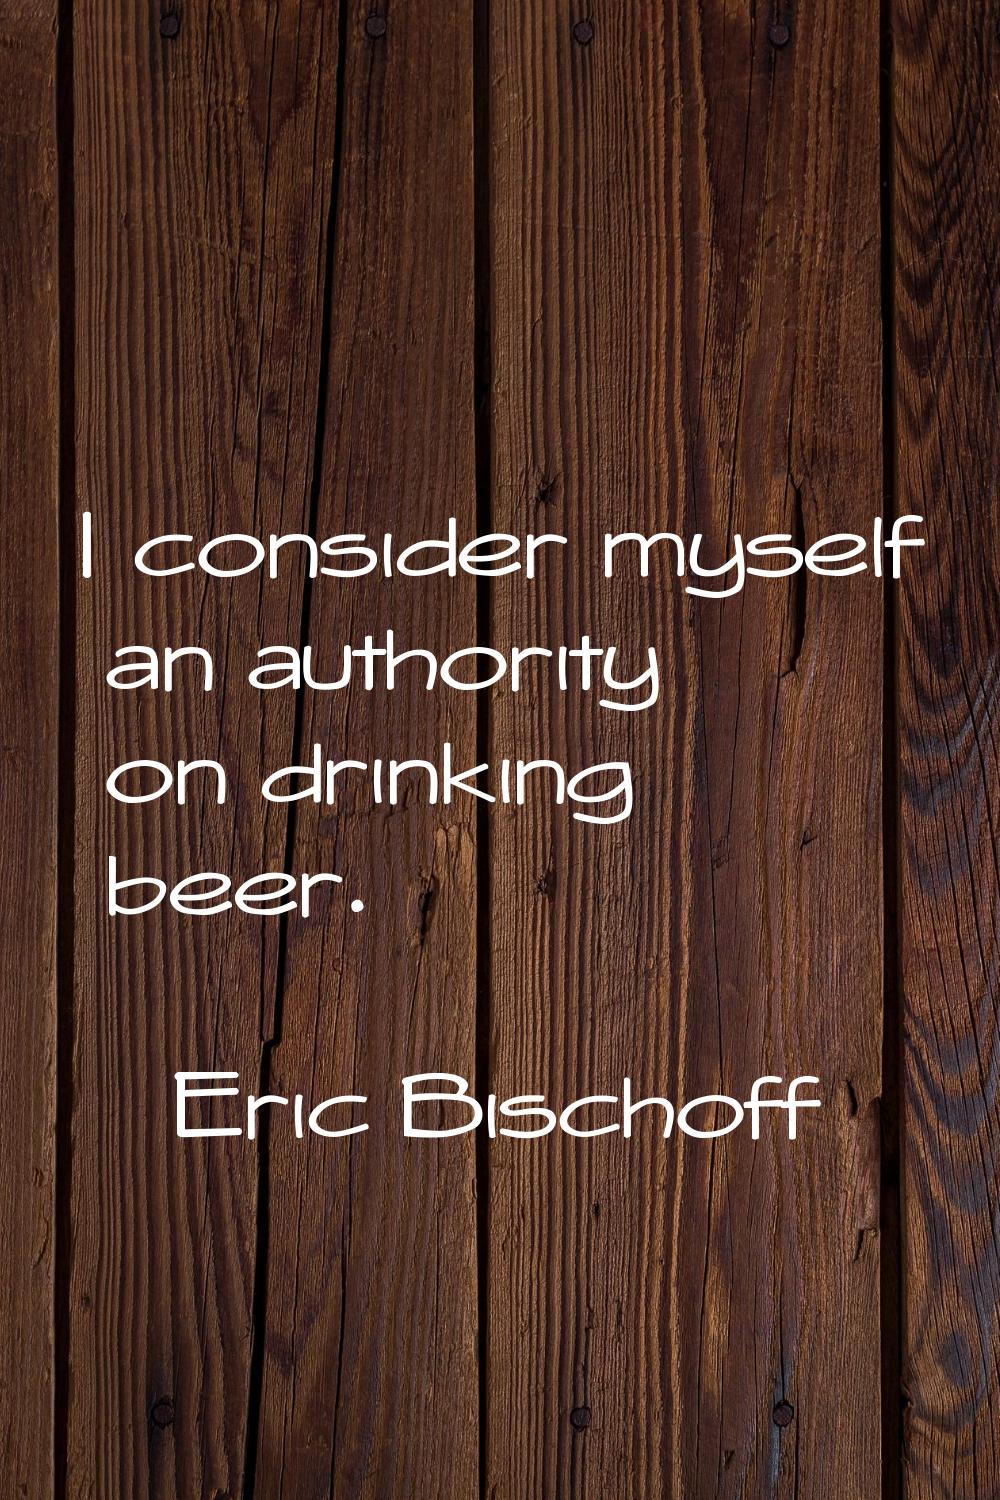 I consider myself an authority on drinking beer.